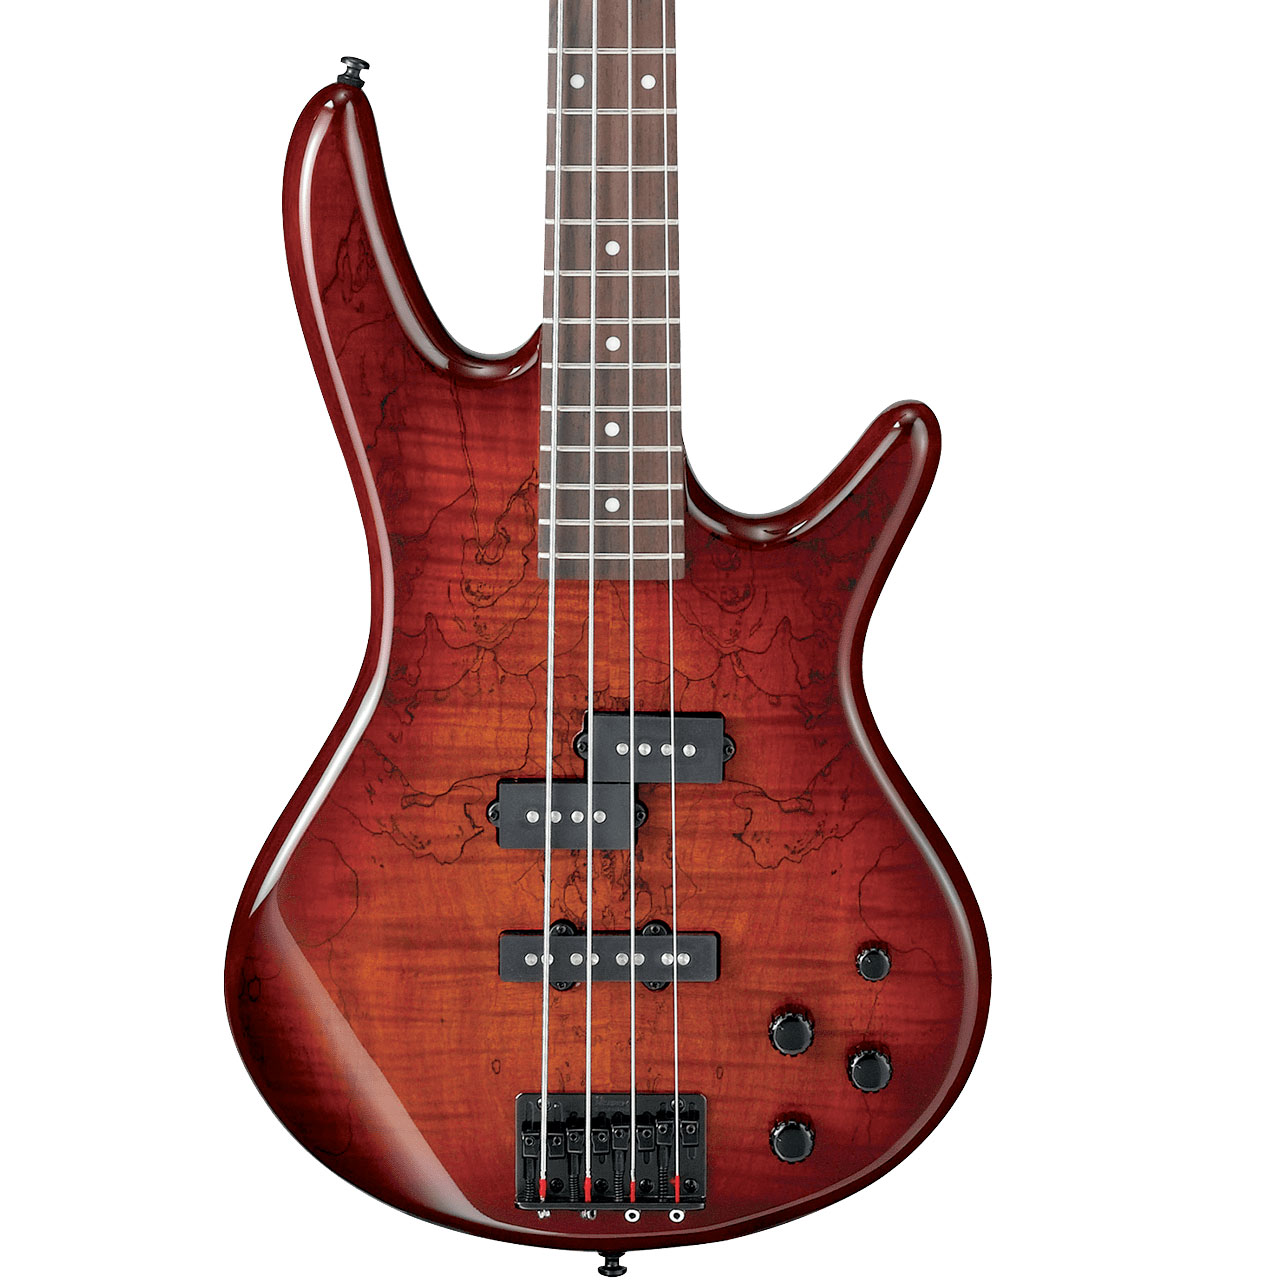  Ibanez Gio GSR200SMCNB Bass Guitar in Charcoal Brown Burst 